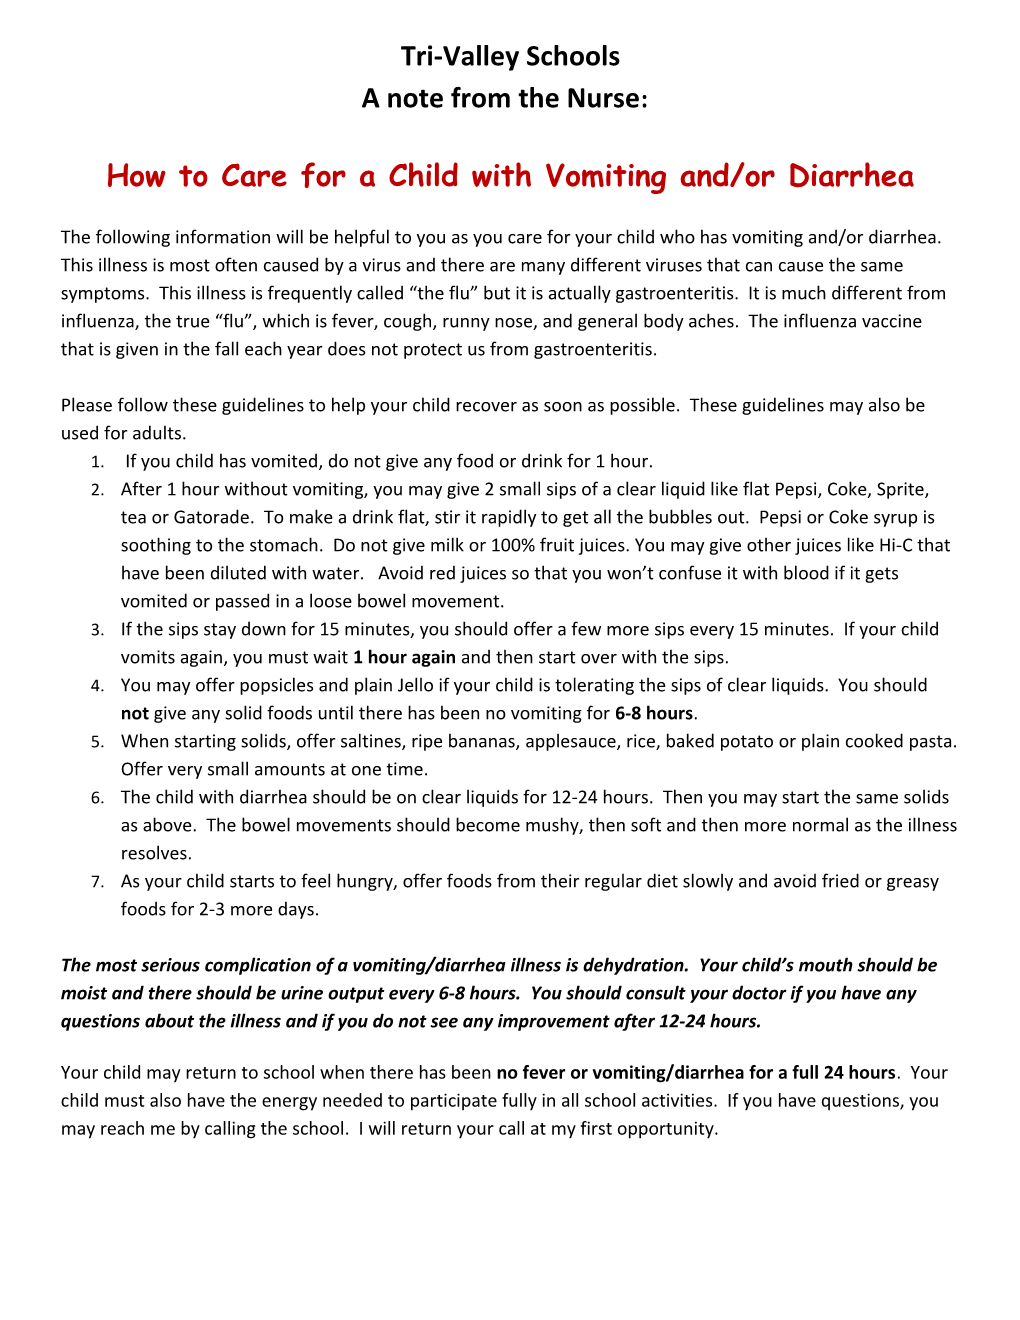 How to Care for a Child with Vomiting And/Or Diarrhea